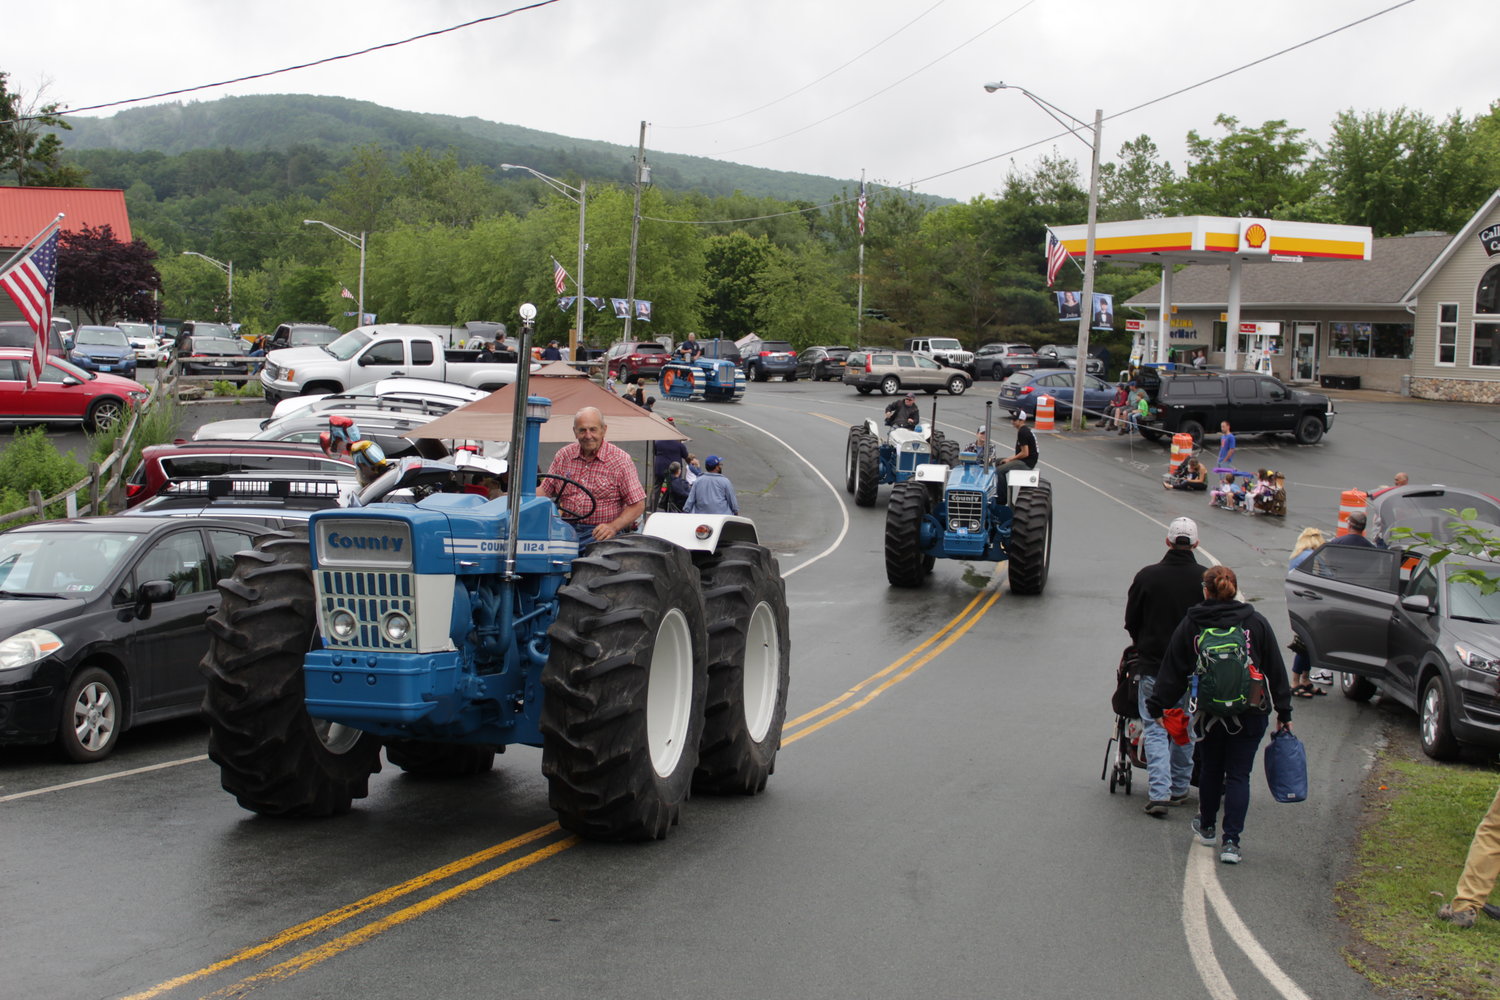 A wet, grey day didn't stop last year's tractor parade.